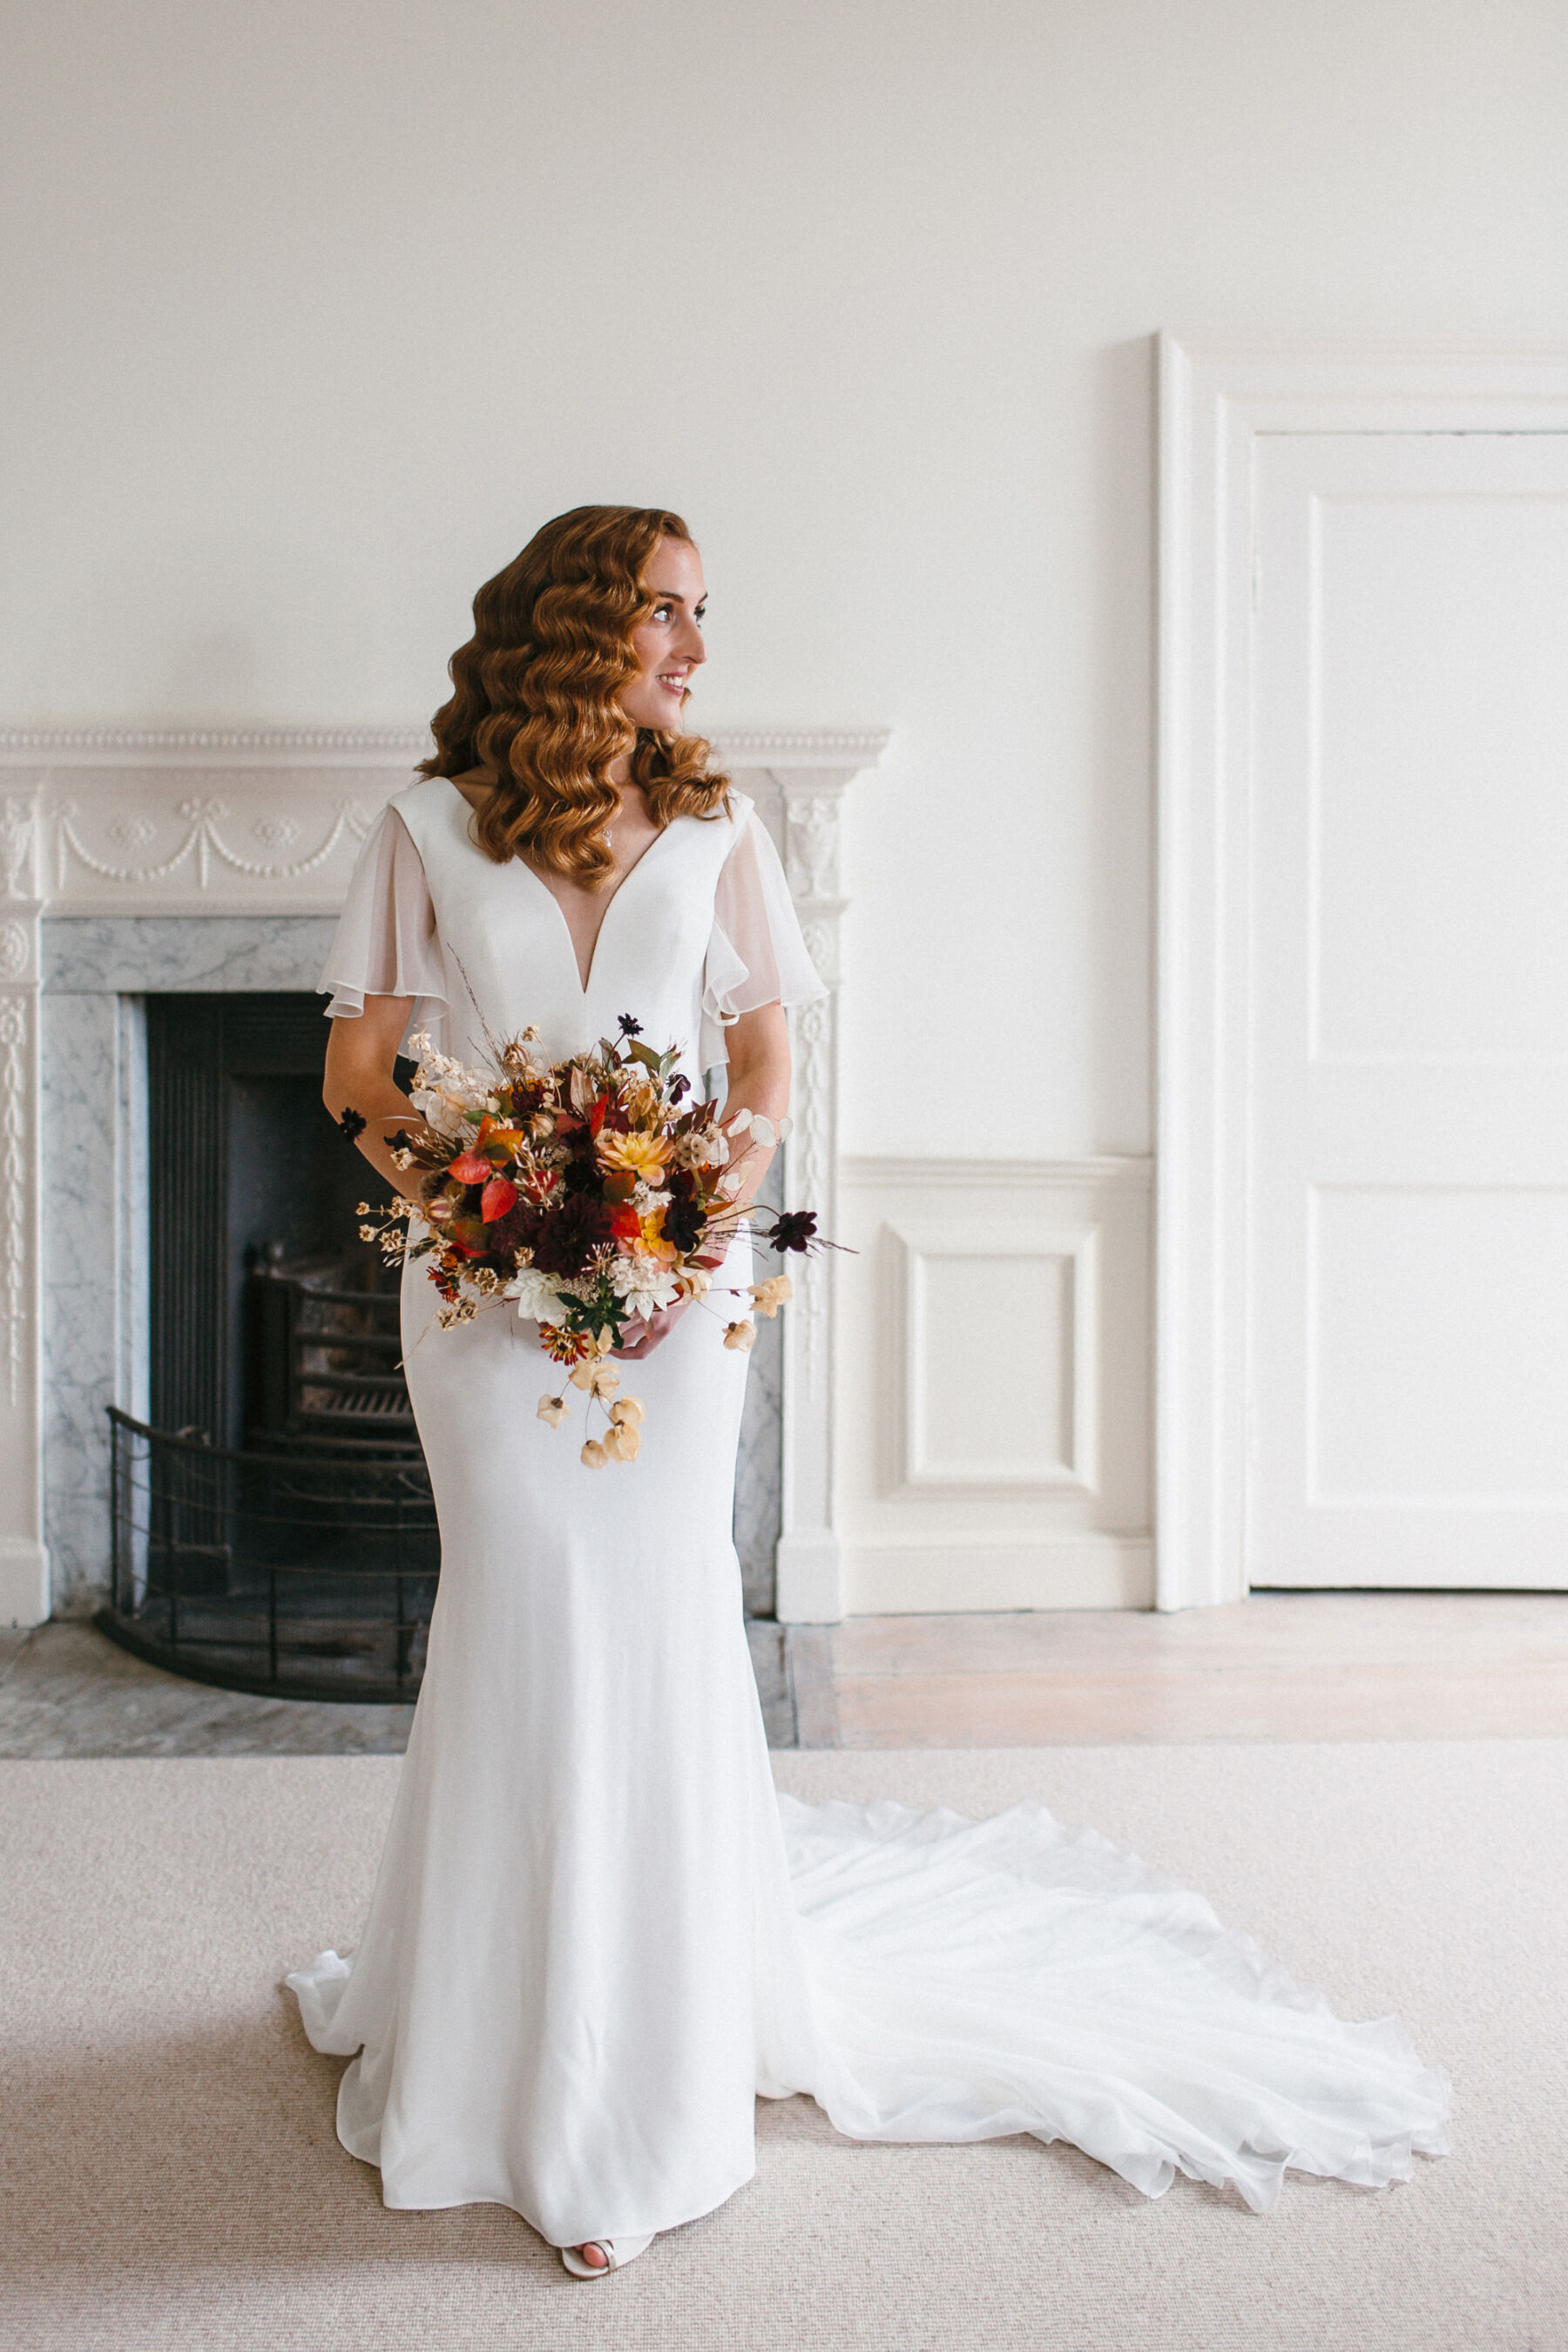 Bride wearing Suzanne Neville wedding dress with tulle sleeves. She has marcel waves in her hair and is looking to the side whilst carrying an Autumn wedding bouquet.